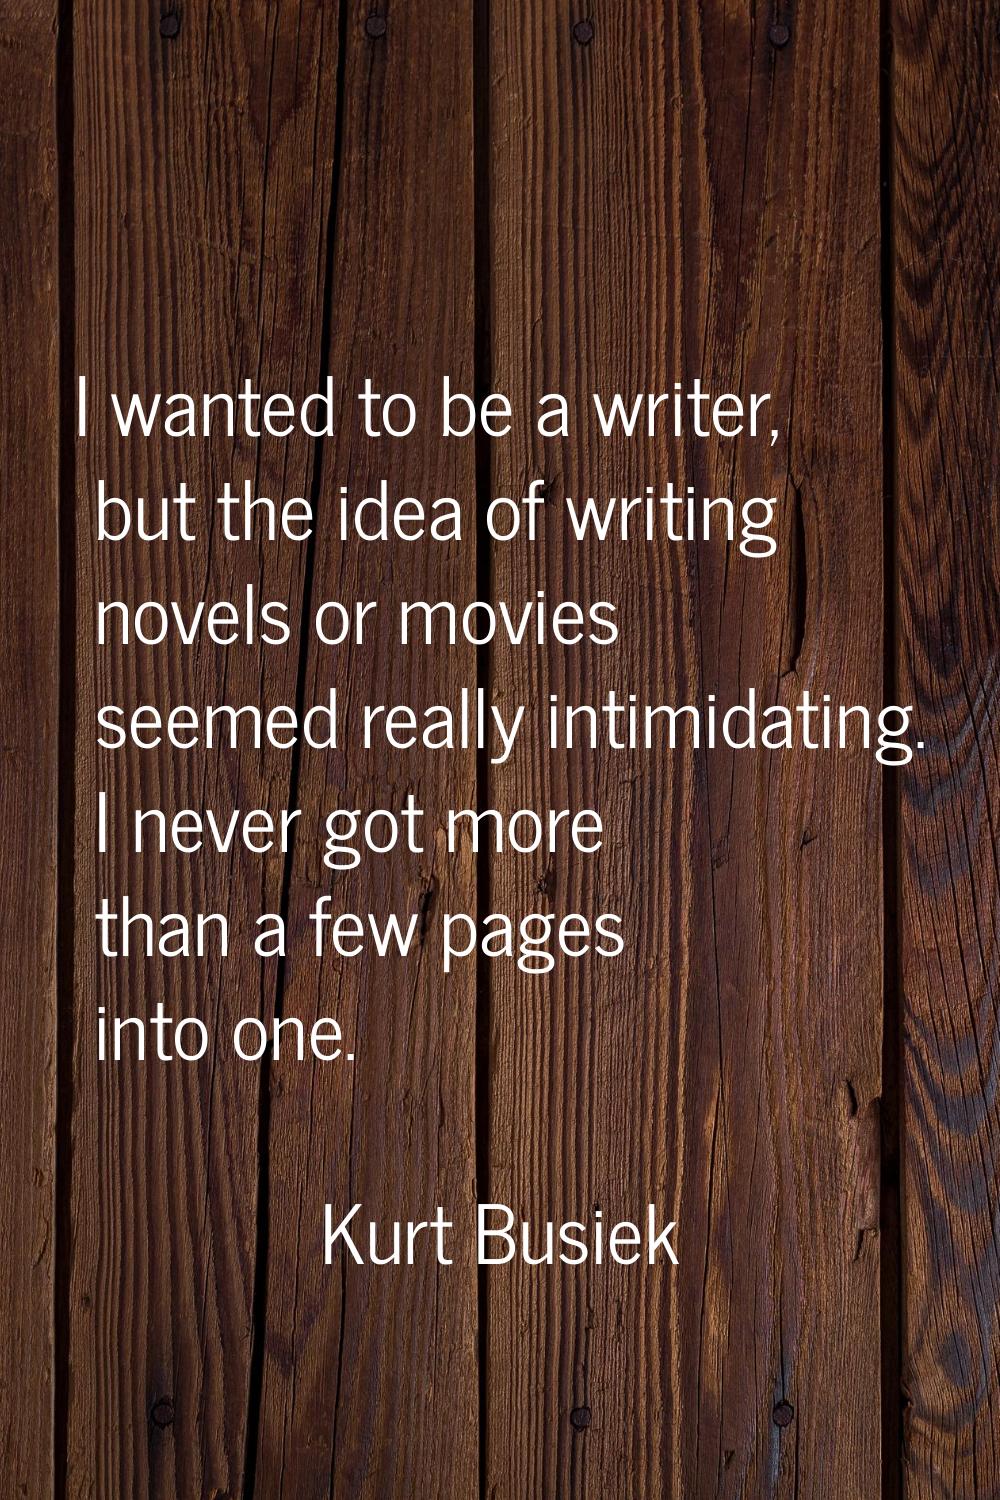 I wanted to be a writer, but the idea of writing novels or movies seemed really intimidating. I nev